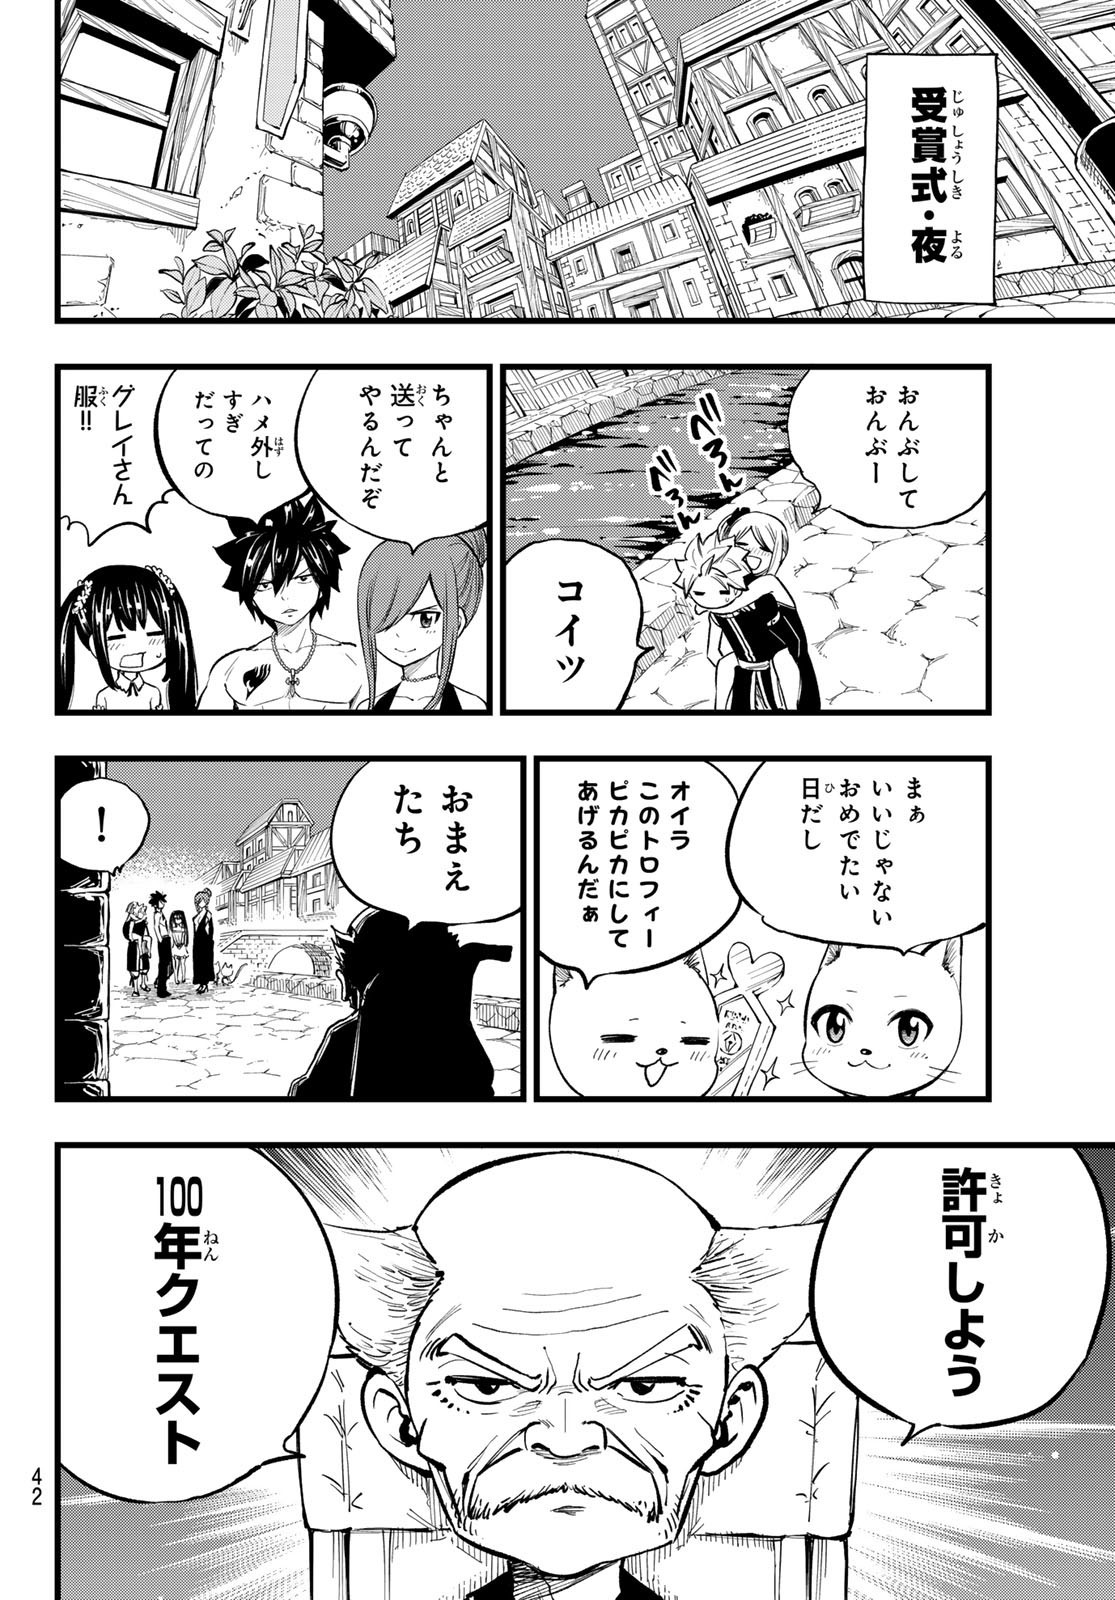 Weekly Shōnen Magazine - 週刊少年マガジン - Chapter 2024-31 - Page 41